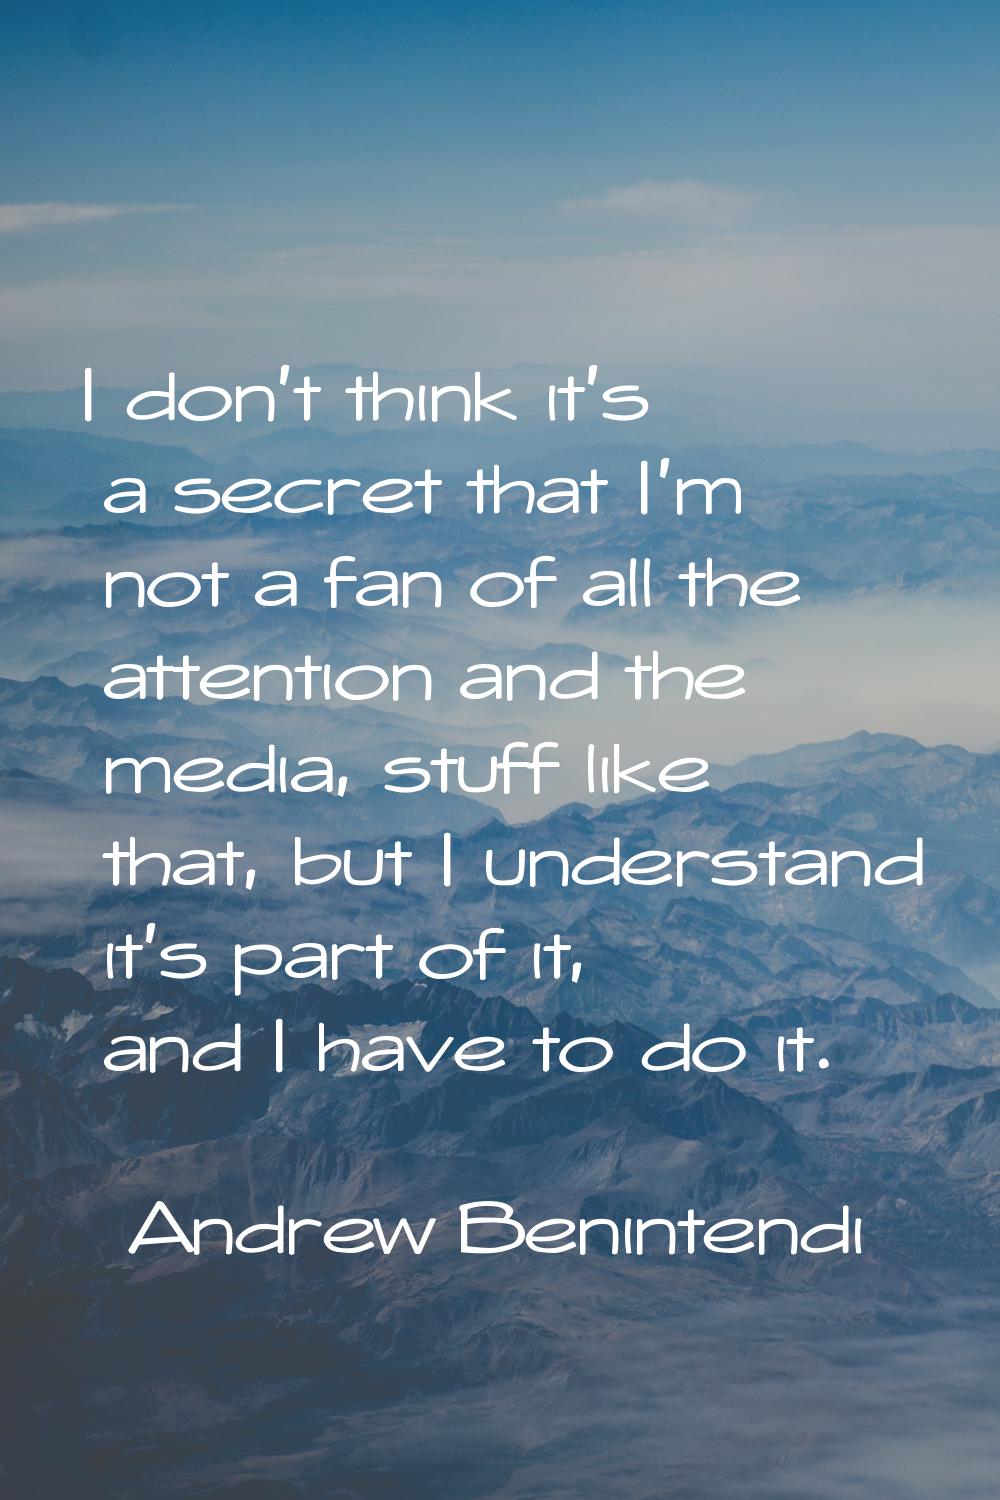 I don't think it's a secret that I'm not a fan of all the attention and the media, stuff like that,